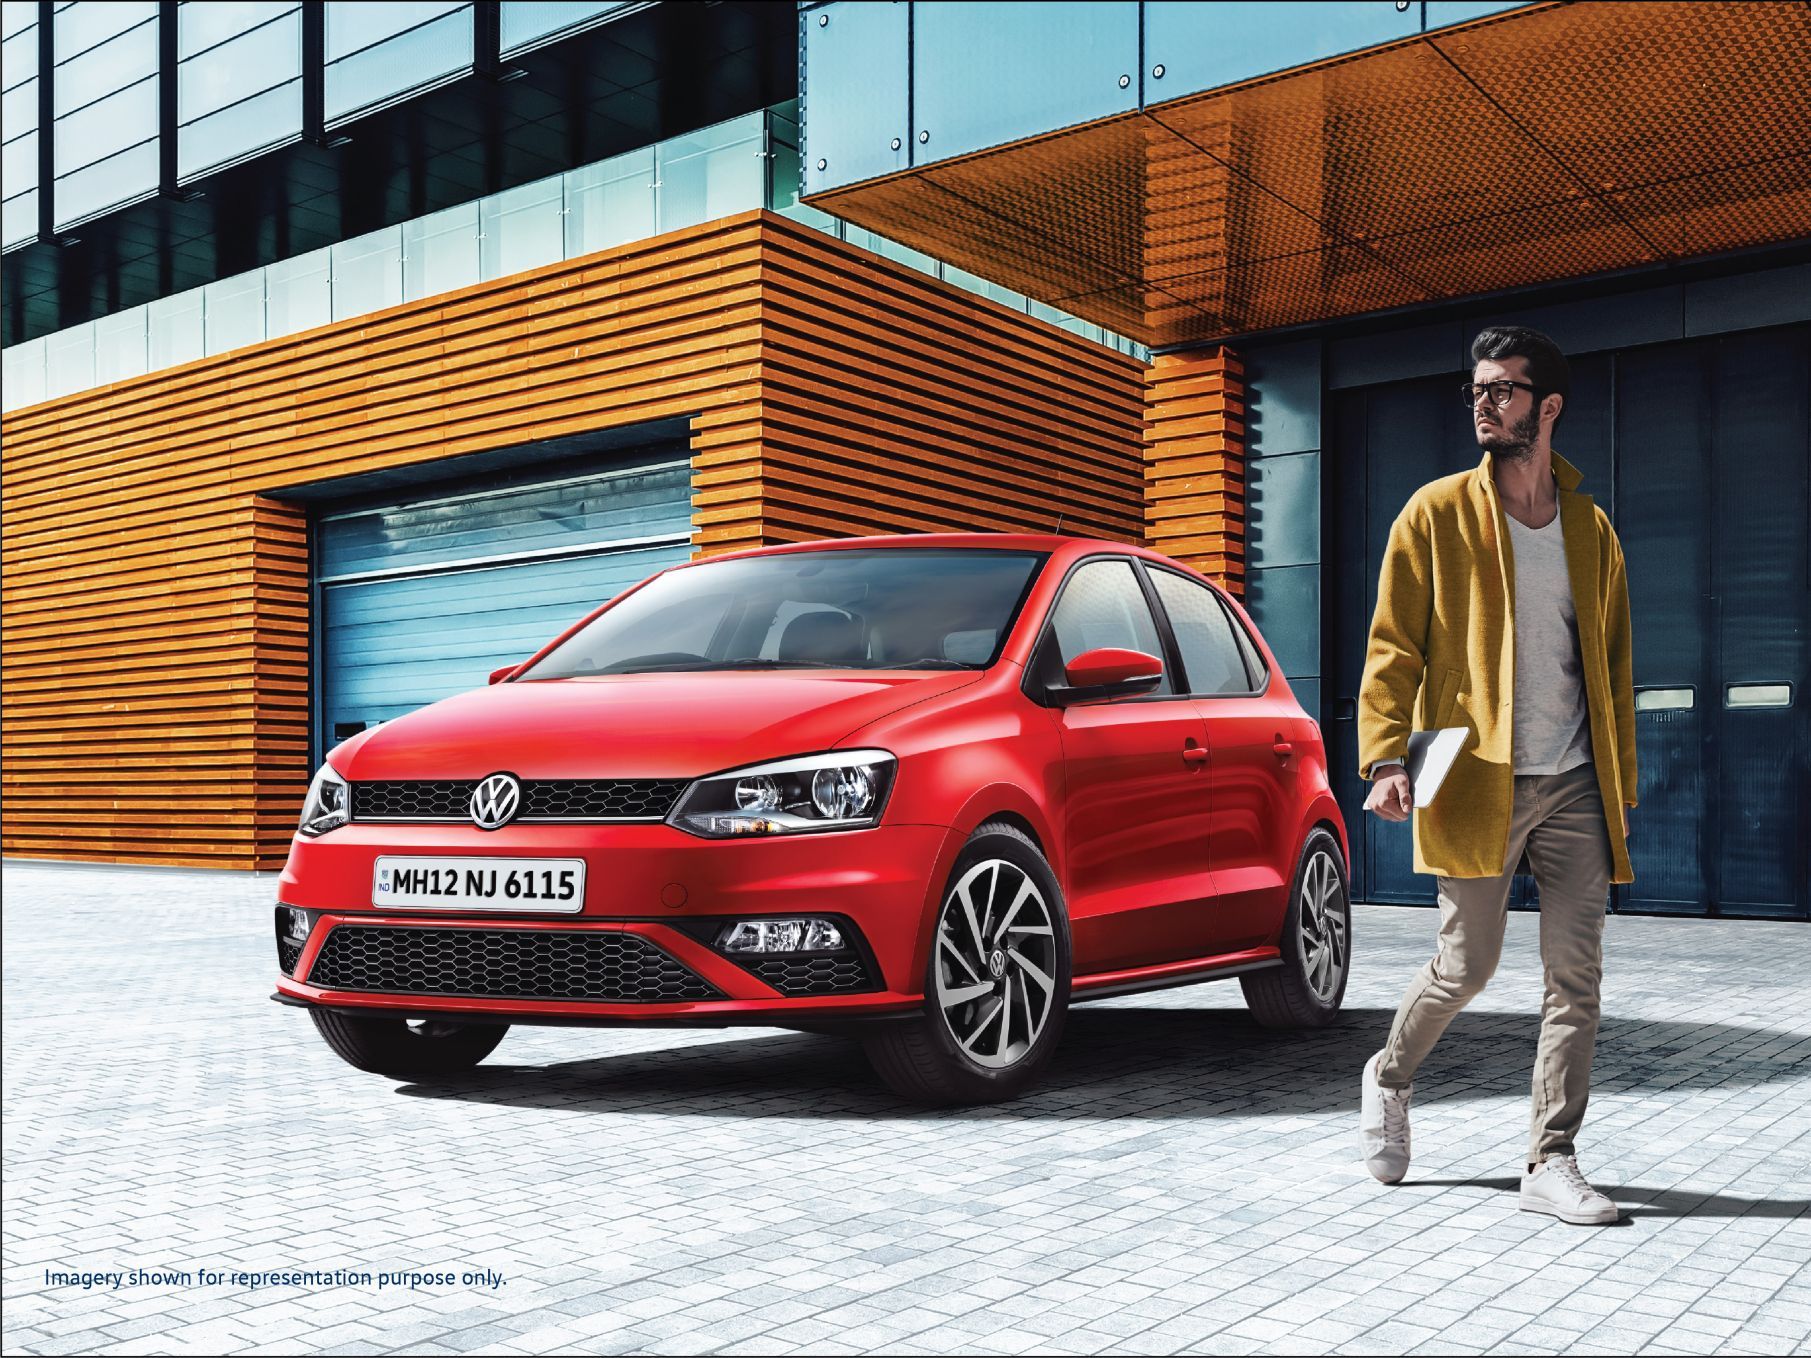 Volkswagen Polo Comfortline TSI Automatic Launched At Rs 8.51 Lakh ...